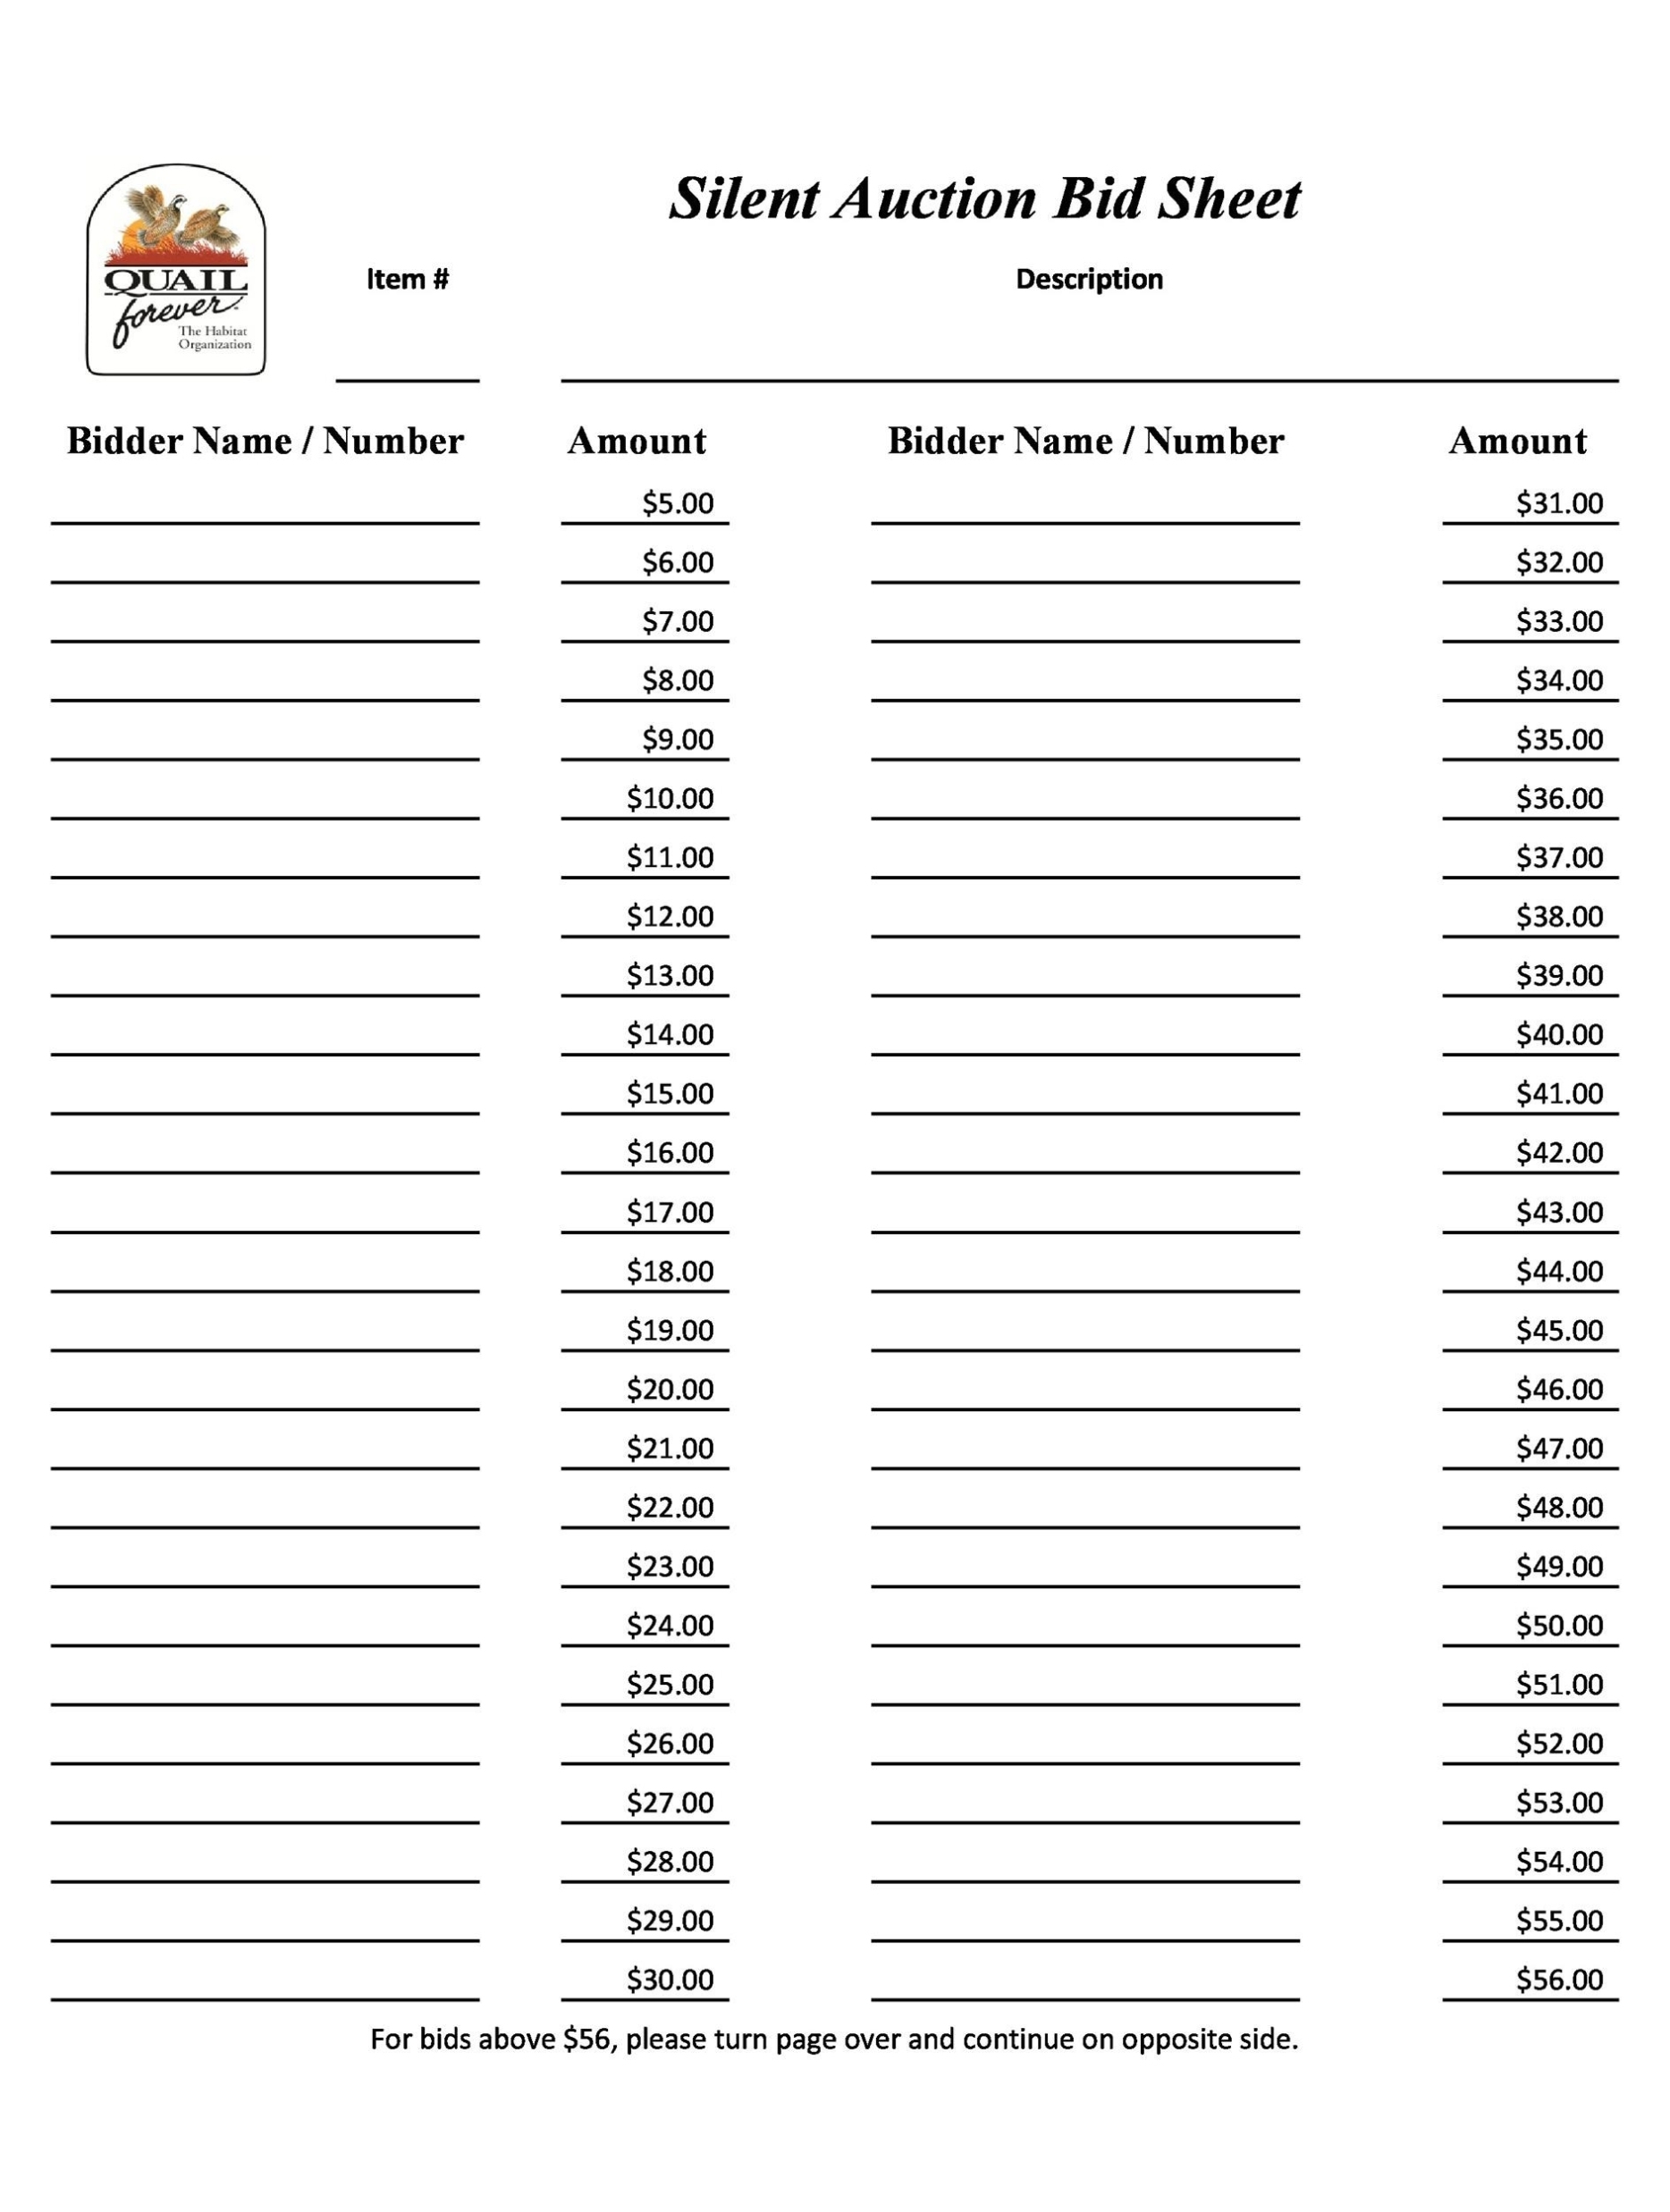 40+ Silent Auction Bid Sheet Templates [Word, Excel] ᐅ Templatelab pertaining to Auction Bid Cards Template